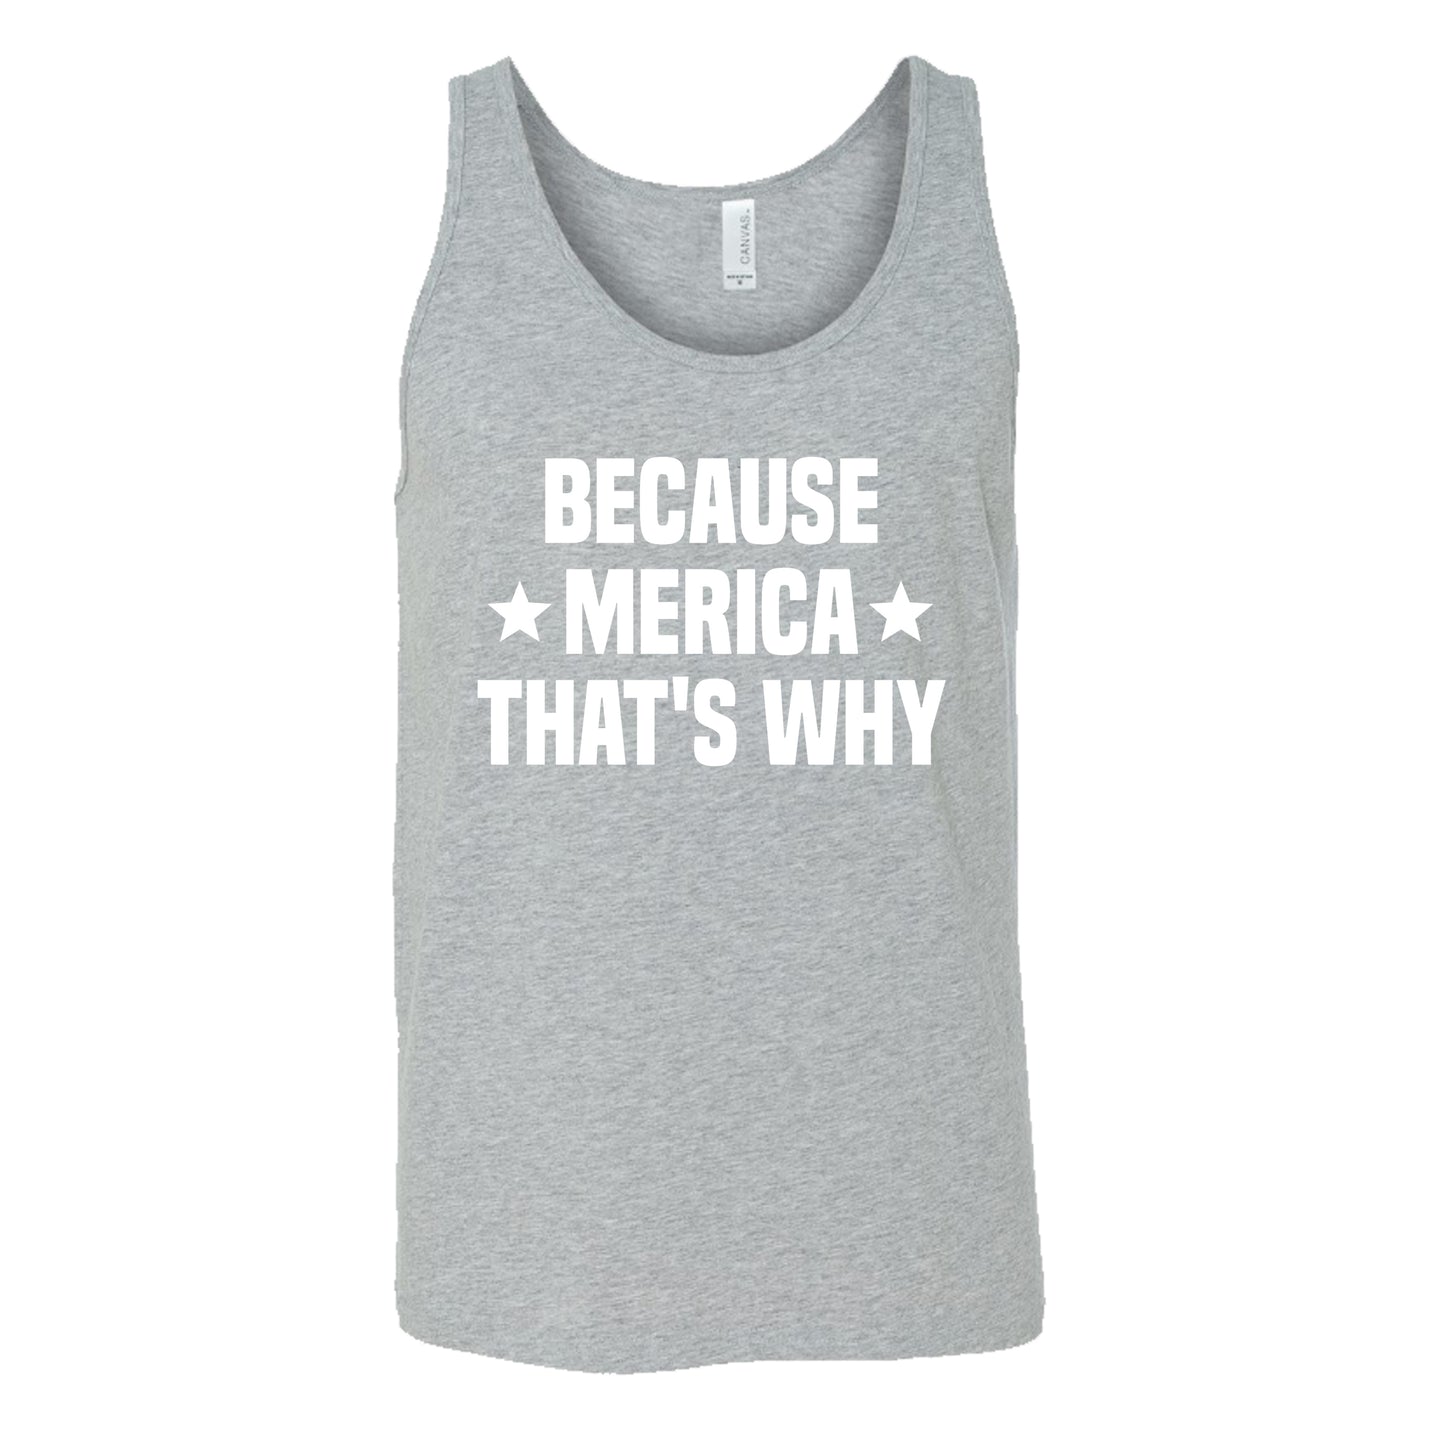 Because Merica That's Why Shirt Unisex